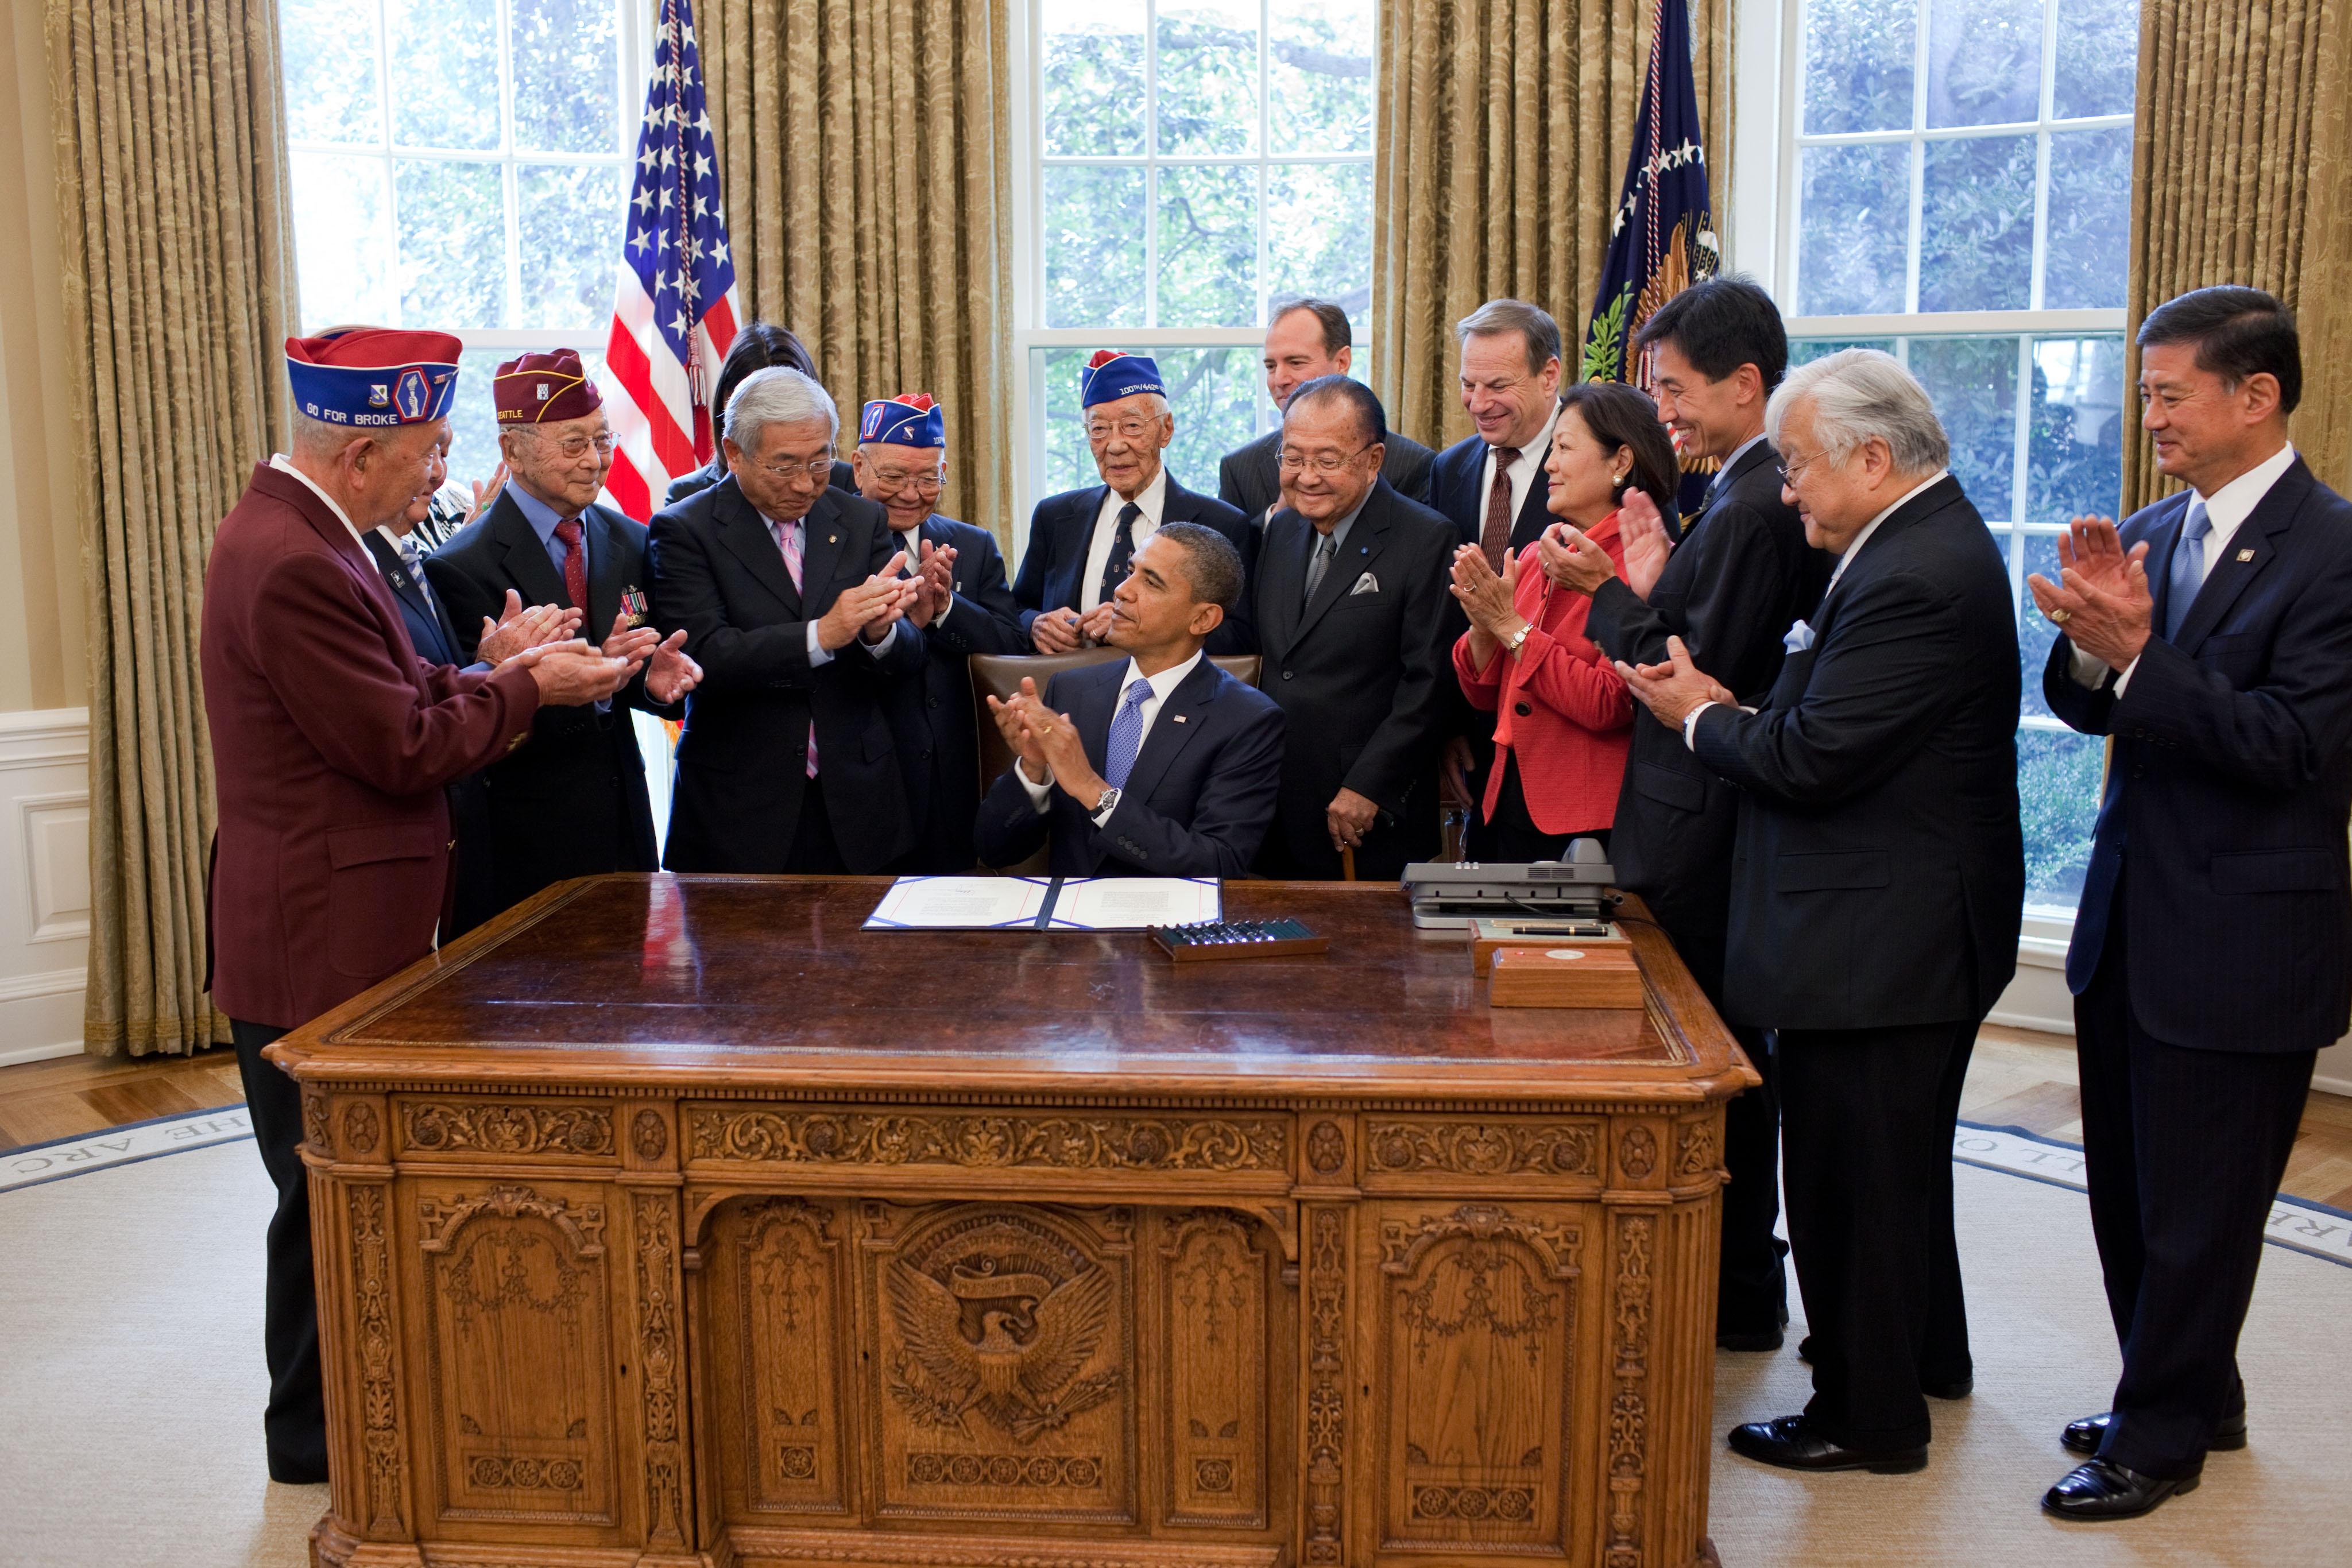 President Obama Signs Bill Granting Congressional Gold Medal to the 100th Infantry Battalion and the 442nd Regimental Combat Team